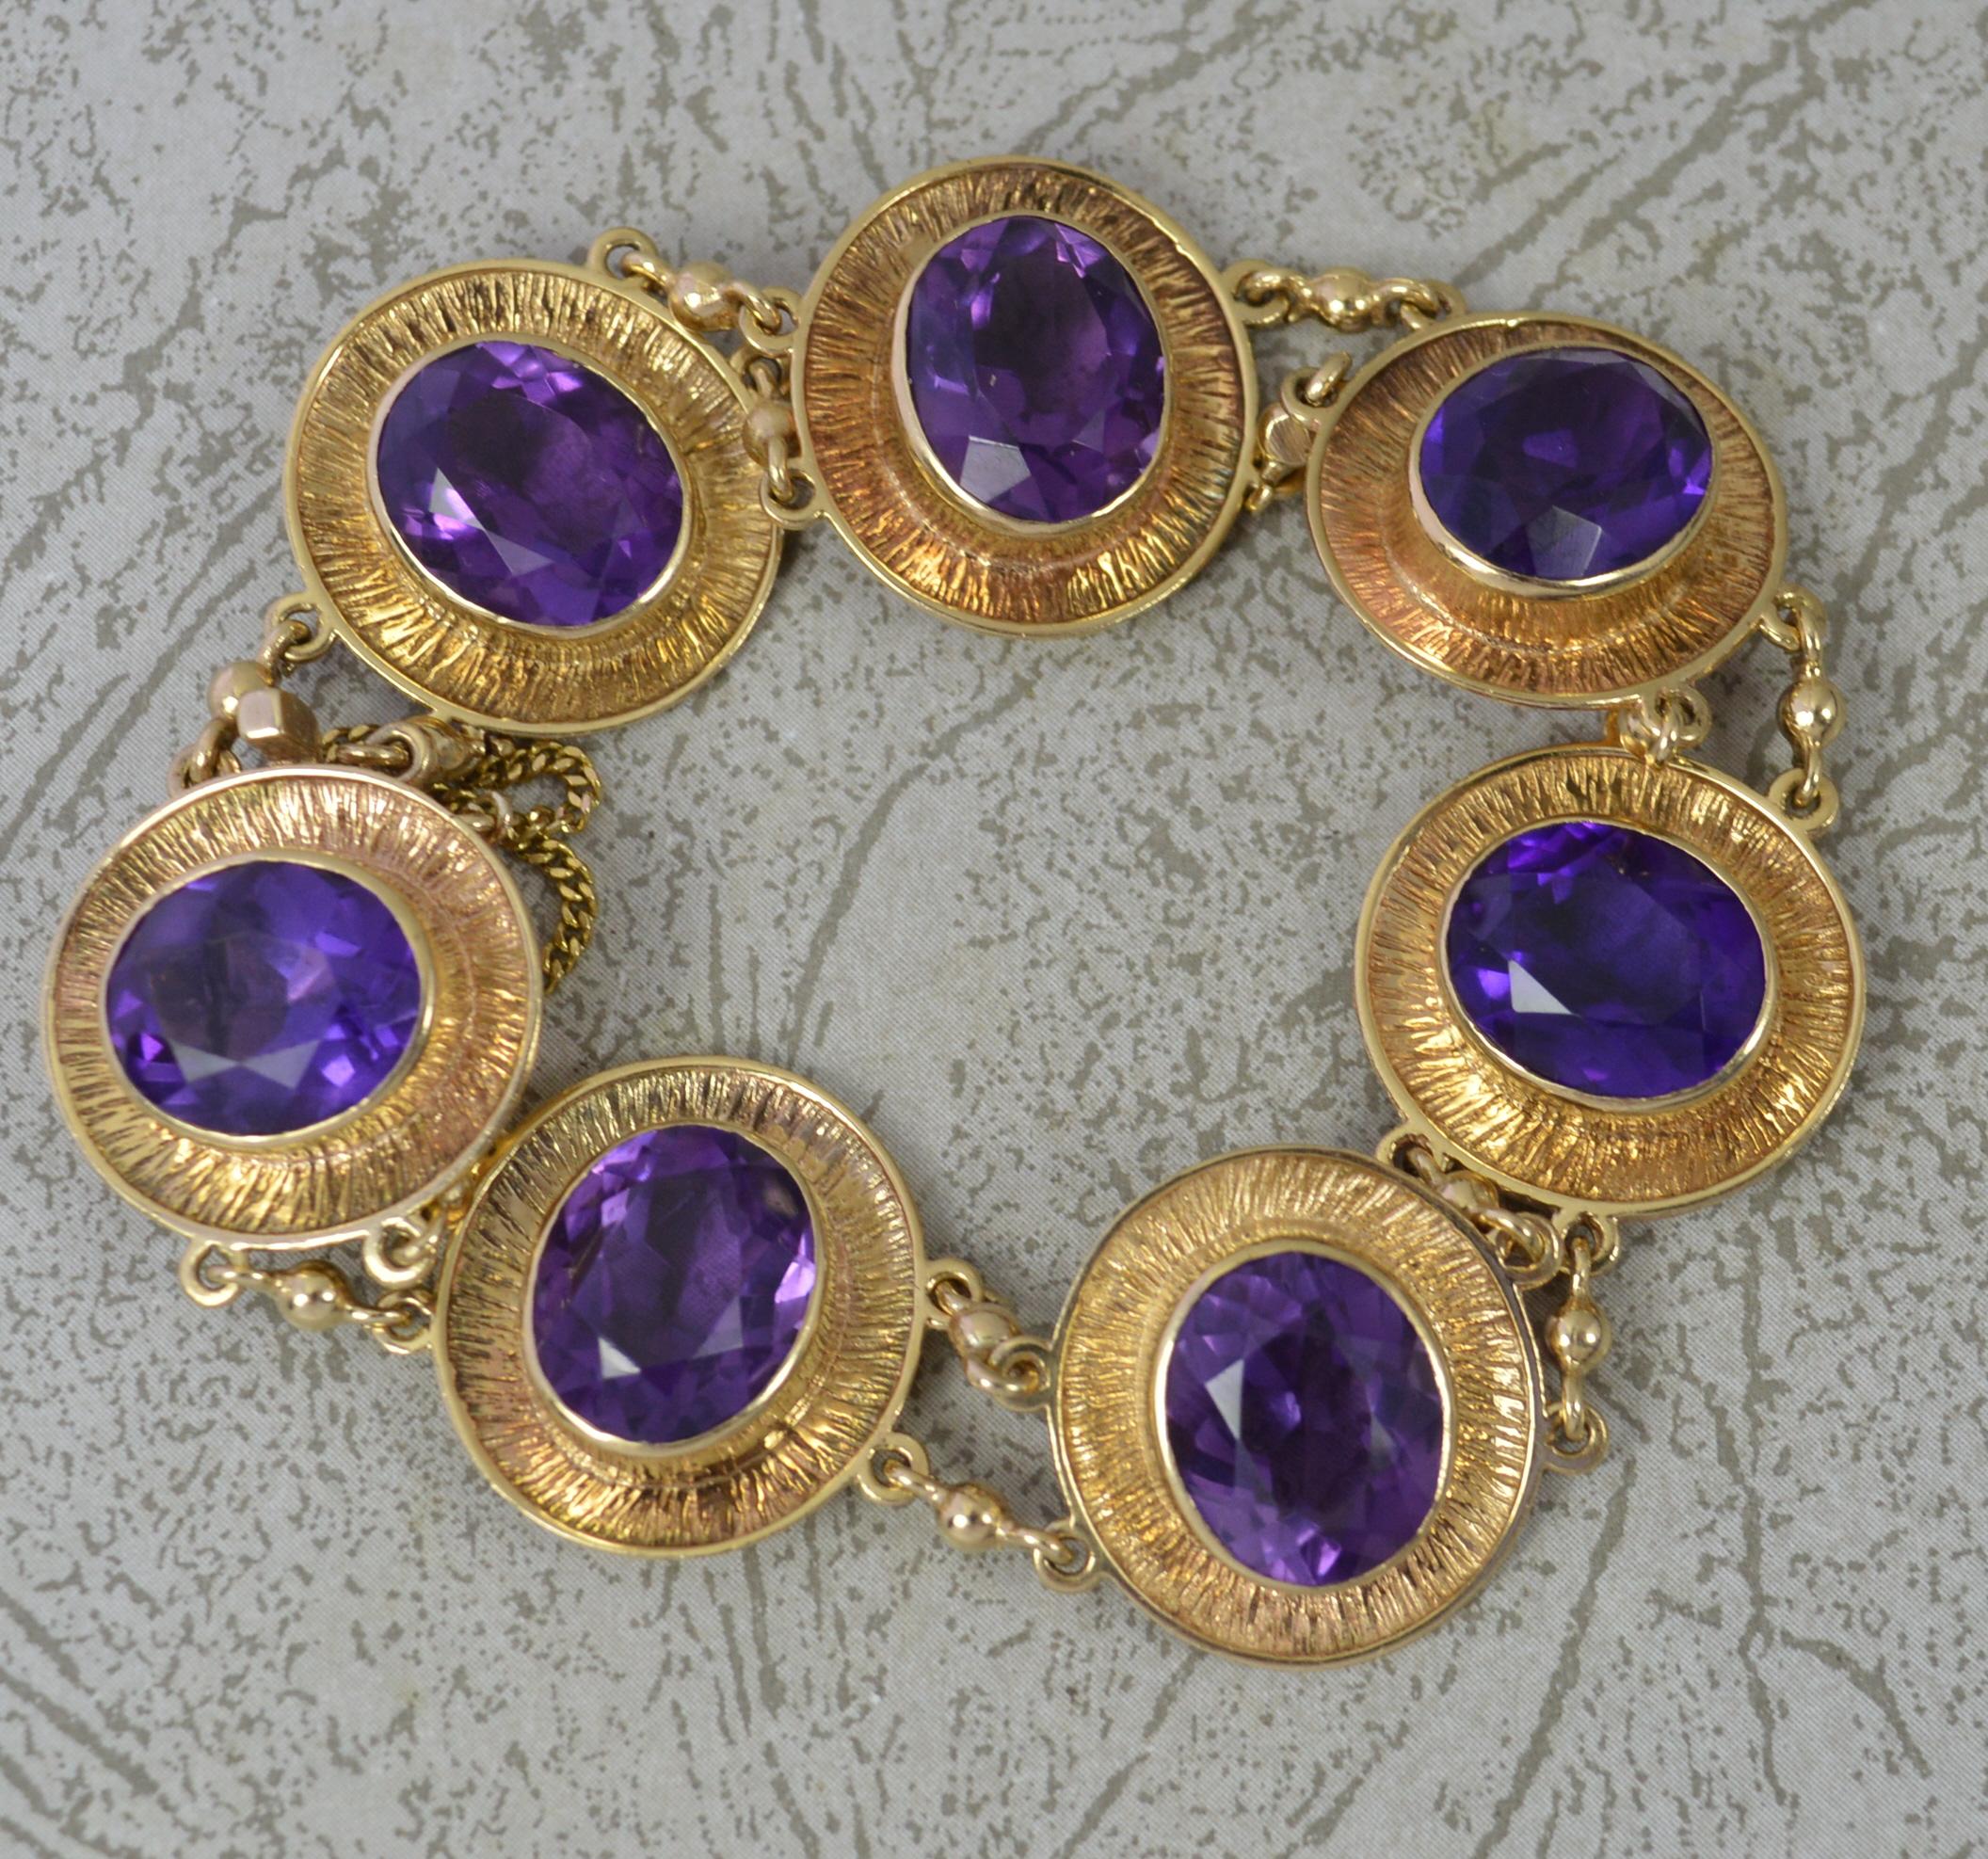 A superb vintage bracelet.
Solid 9 carat yellow gold example.
Designed with seven large oval cut purple amethyst stones, full bezel settings with a bark type finish surround. 
9mm x 12mm amethyst. 17mm x 19mm panels.

CONDITION ; Very good for age.